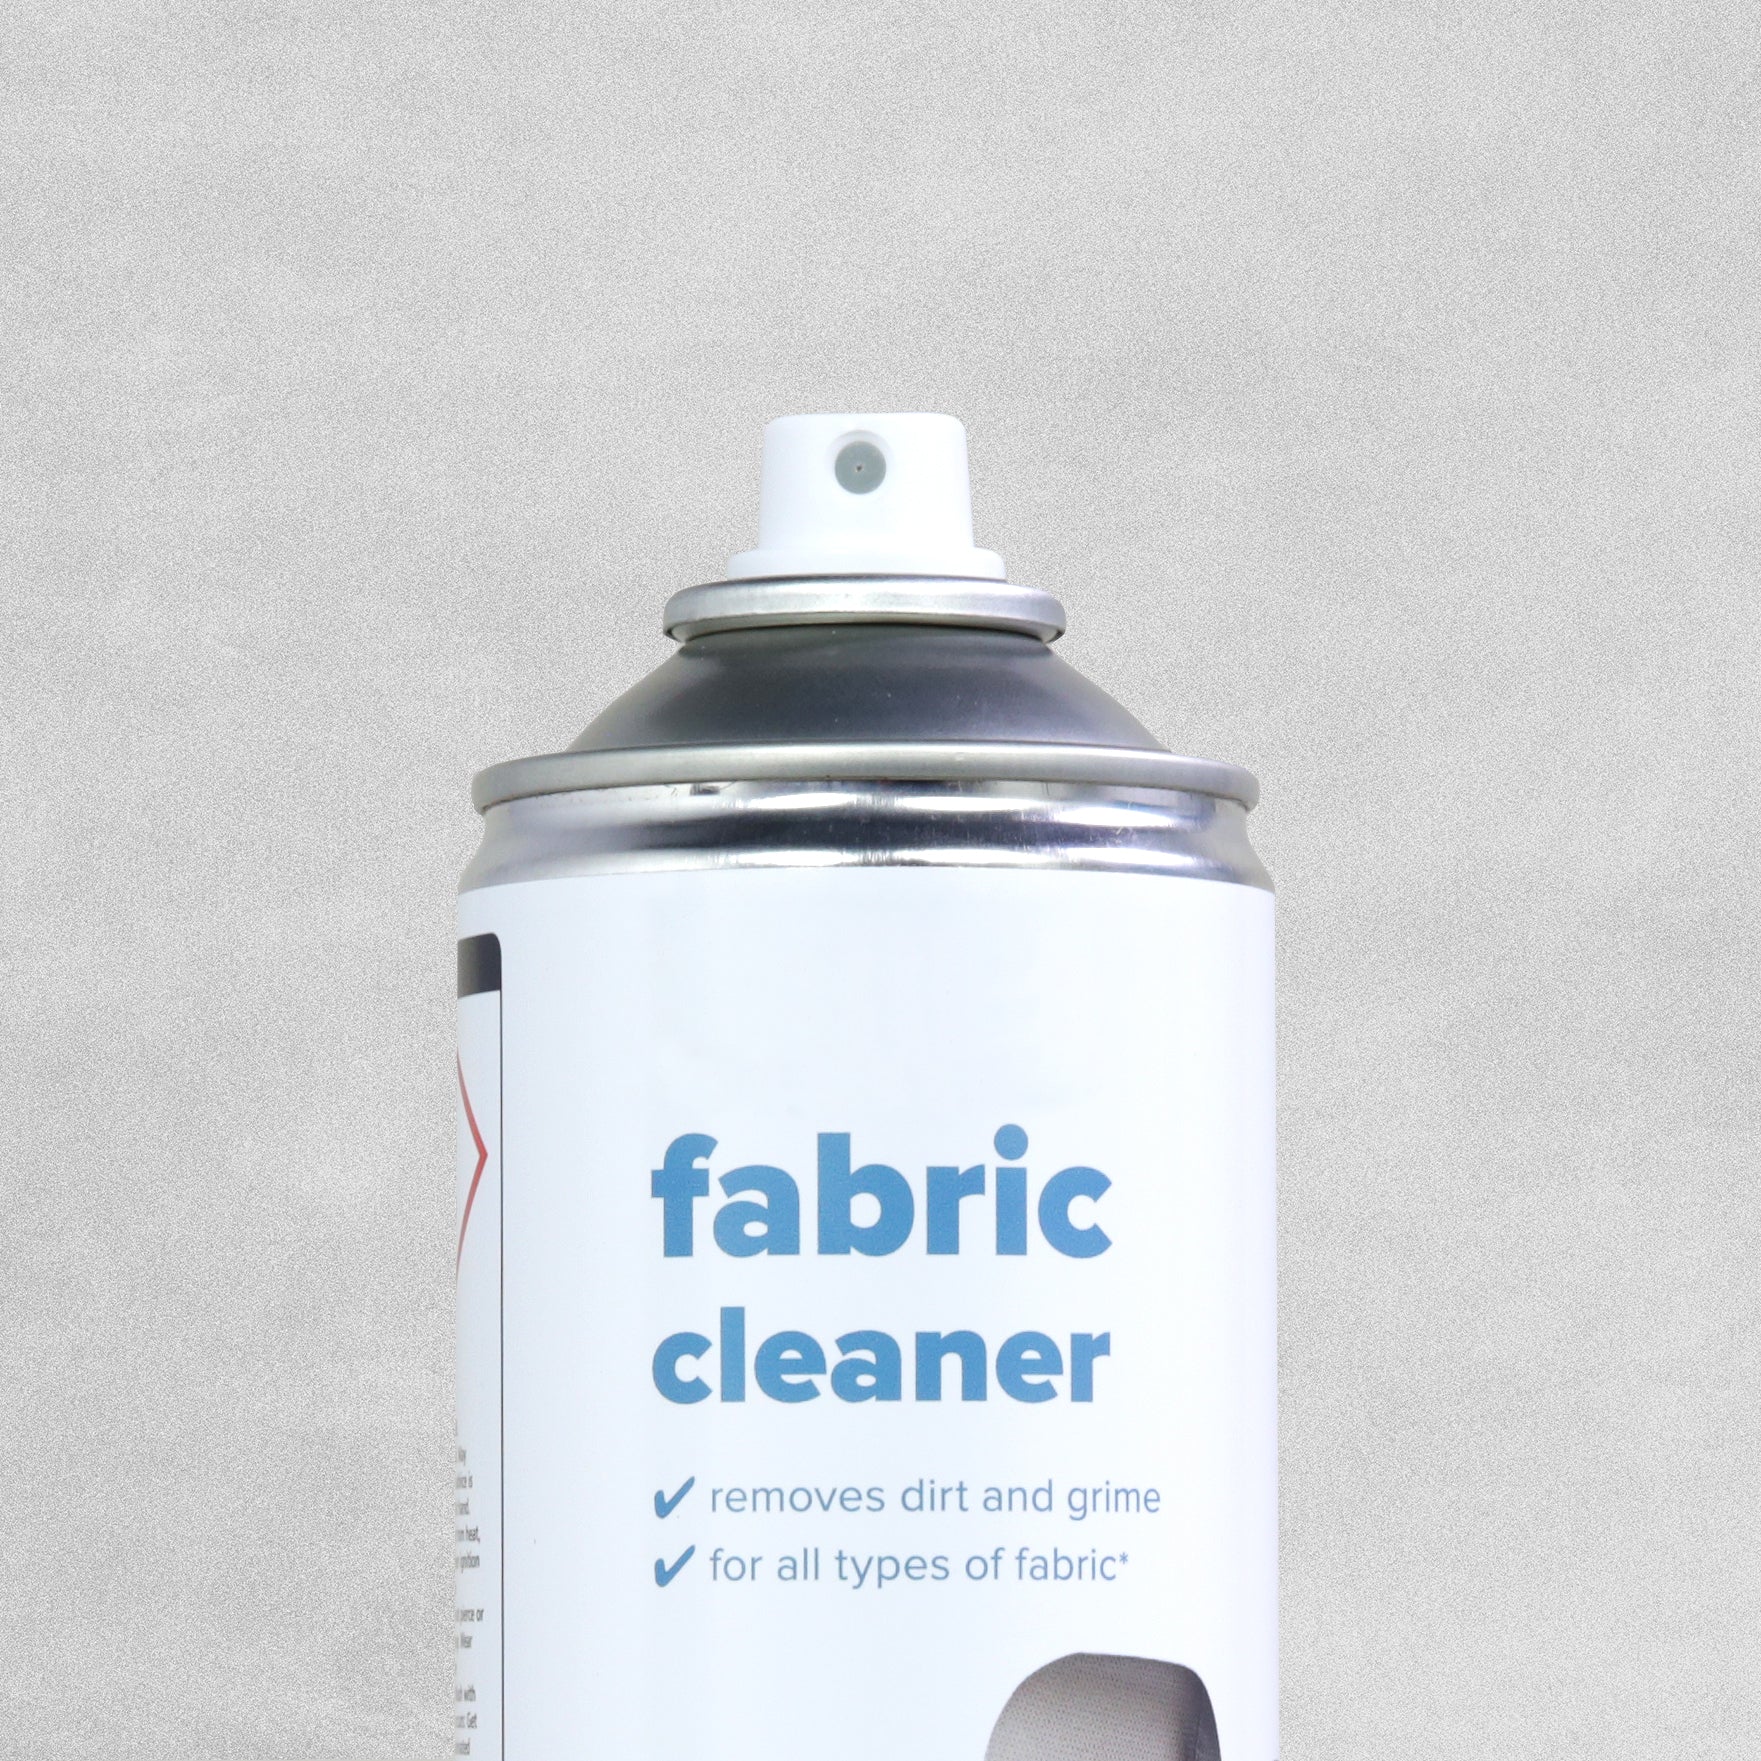 Upholstery Fabric Cleaner